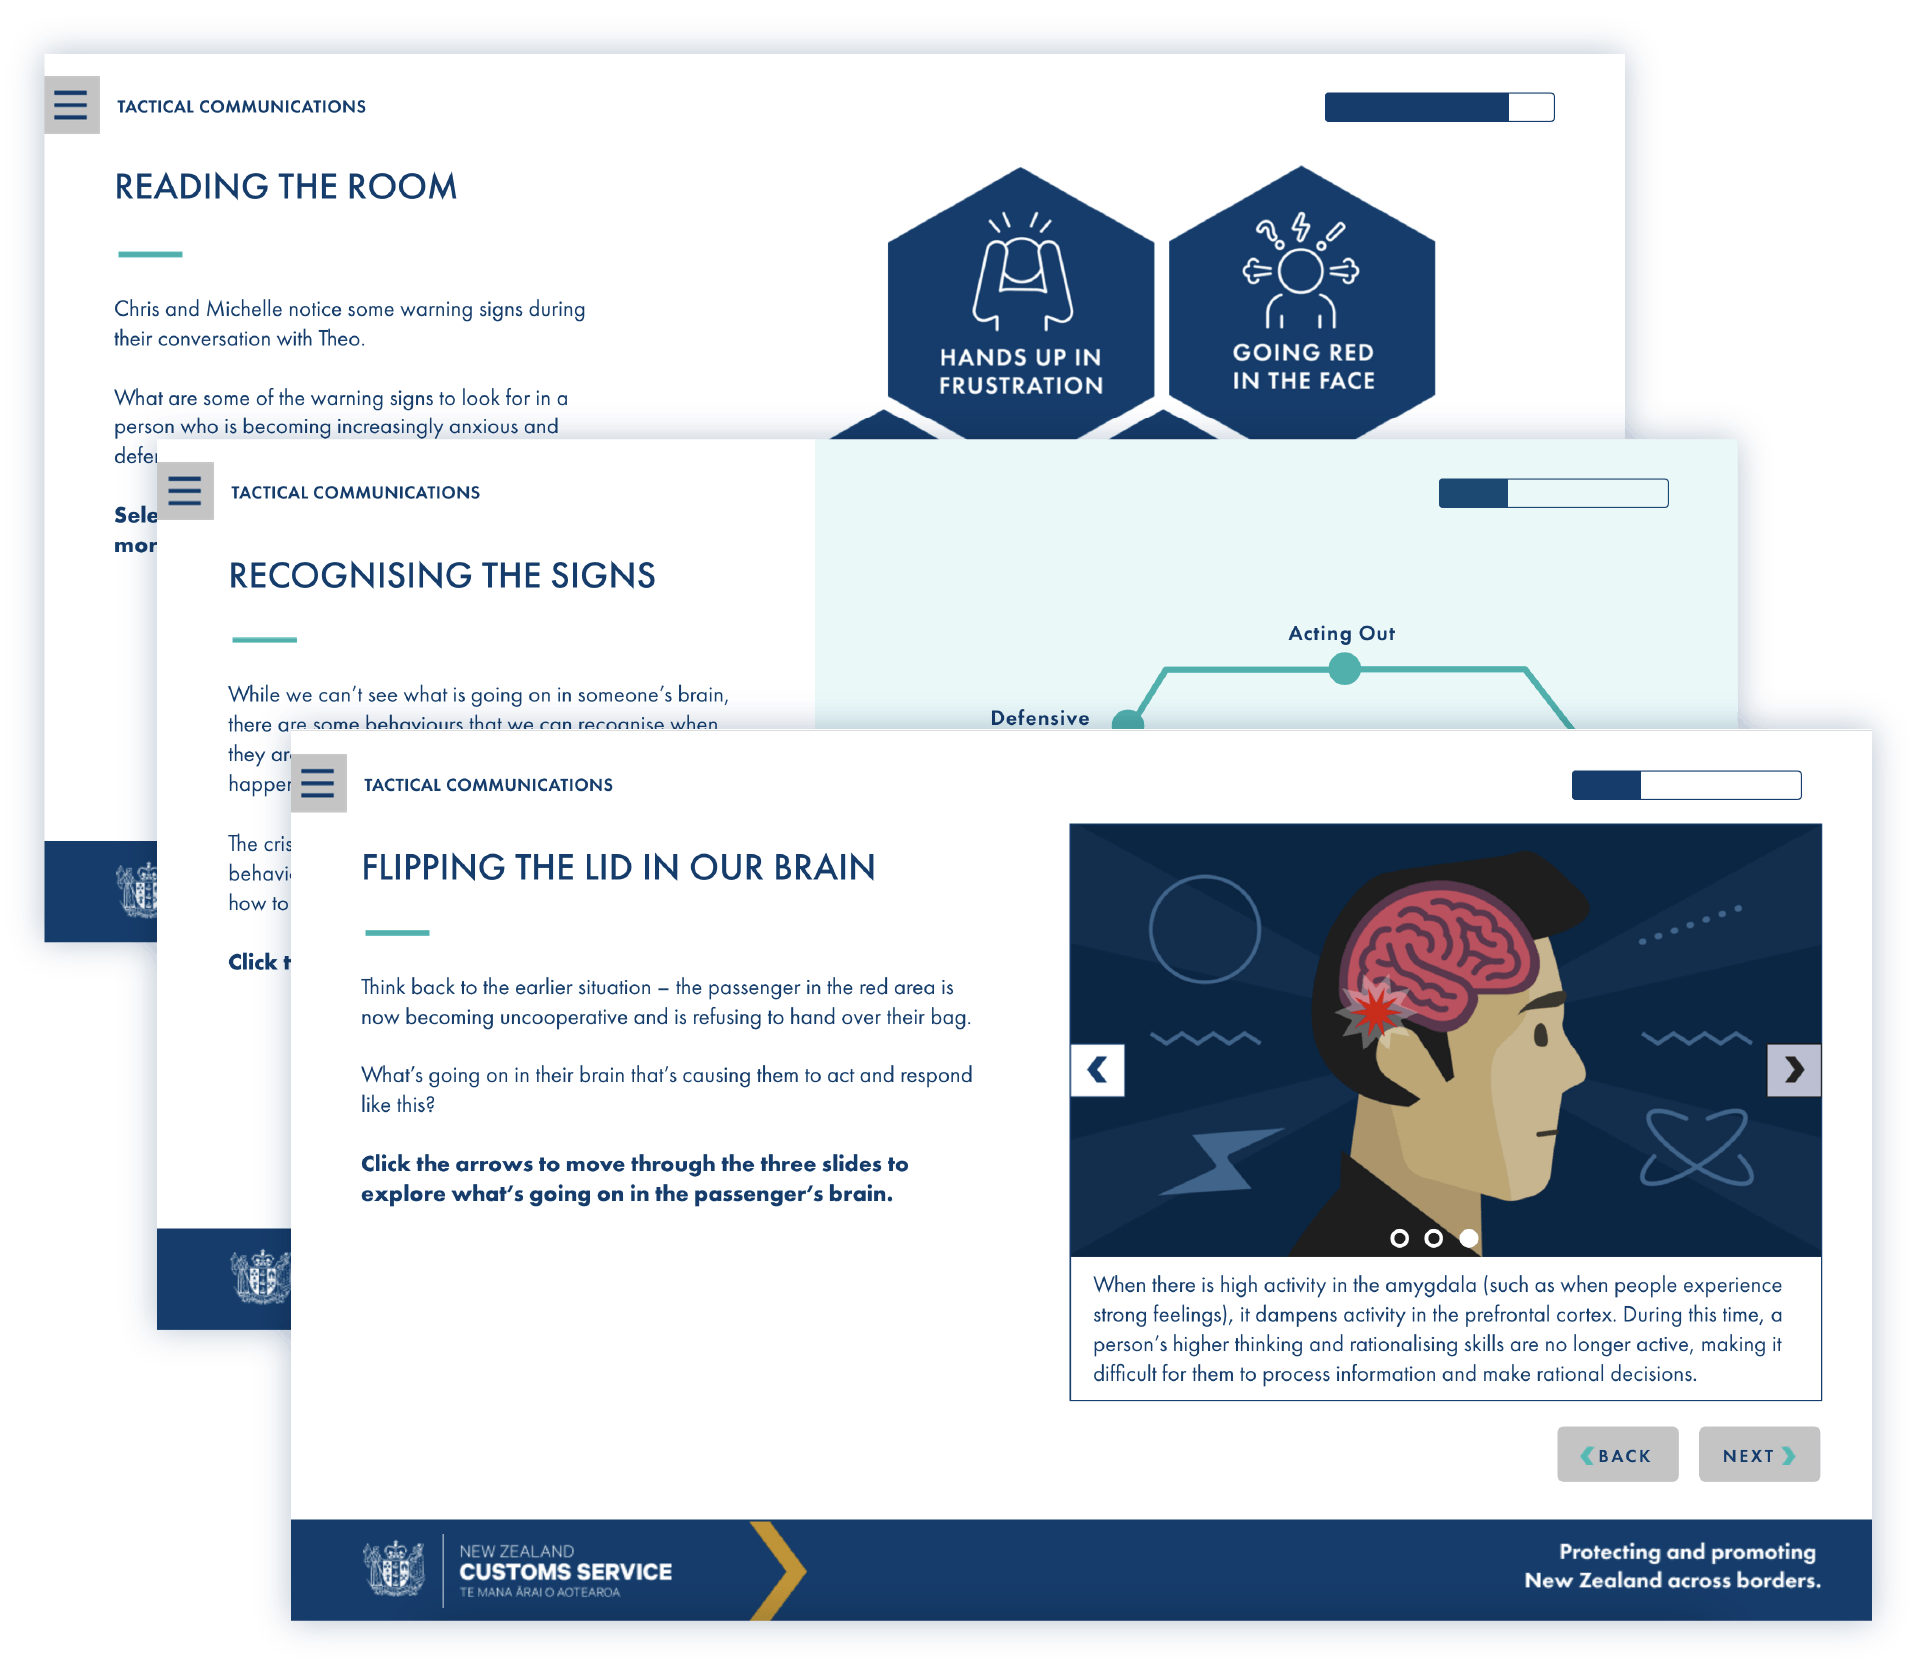 Screenshots of eLearning modules showing interactive diagrams around what happens in our brains and bodies during confrontational situations